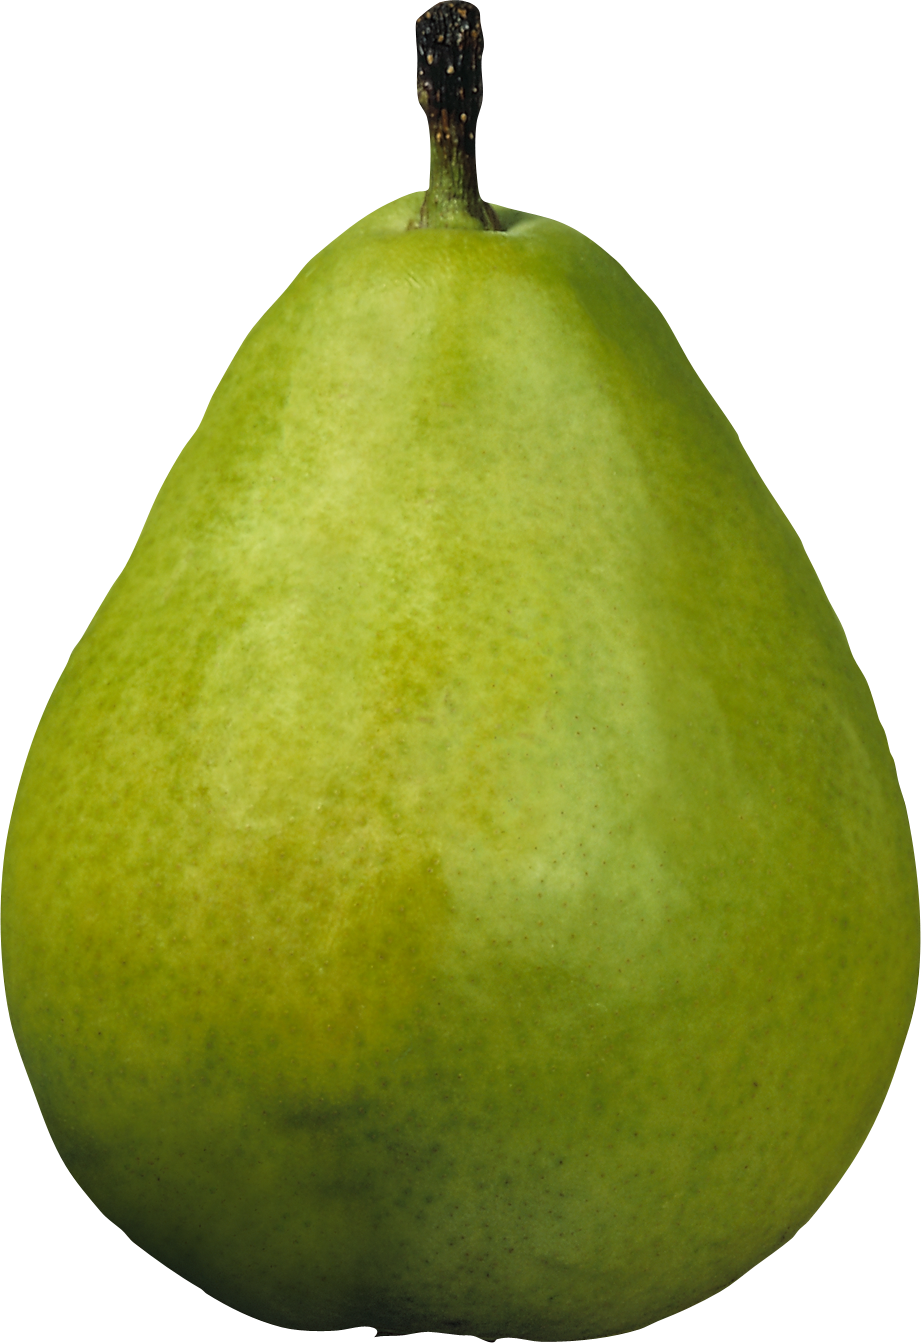 Pear Png Transparent Images - Pear Png (921x1343)